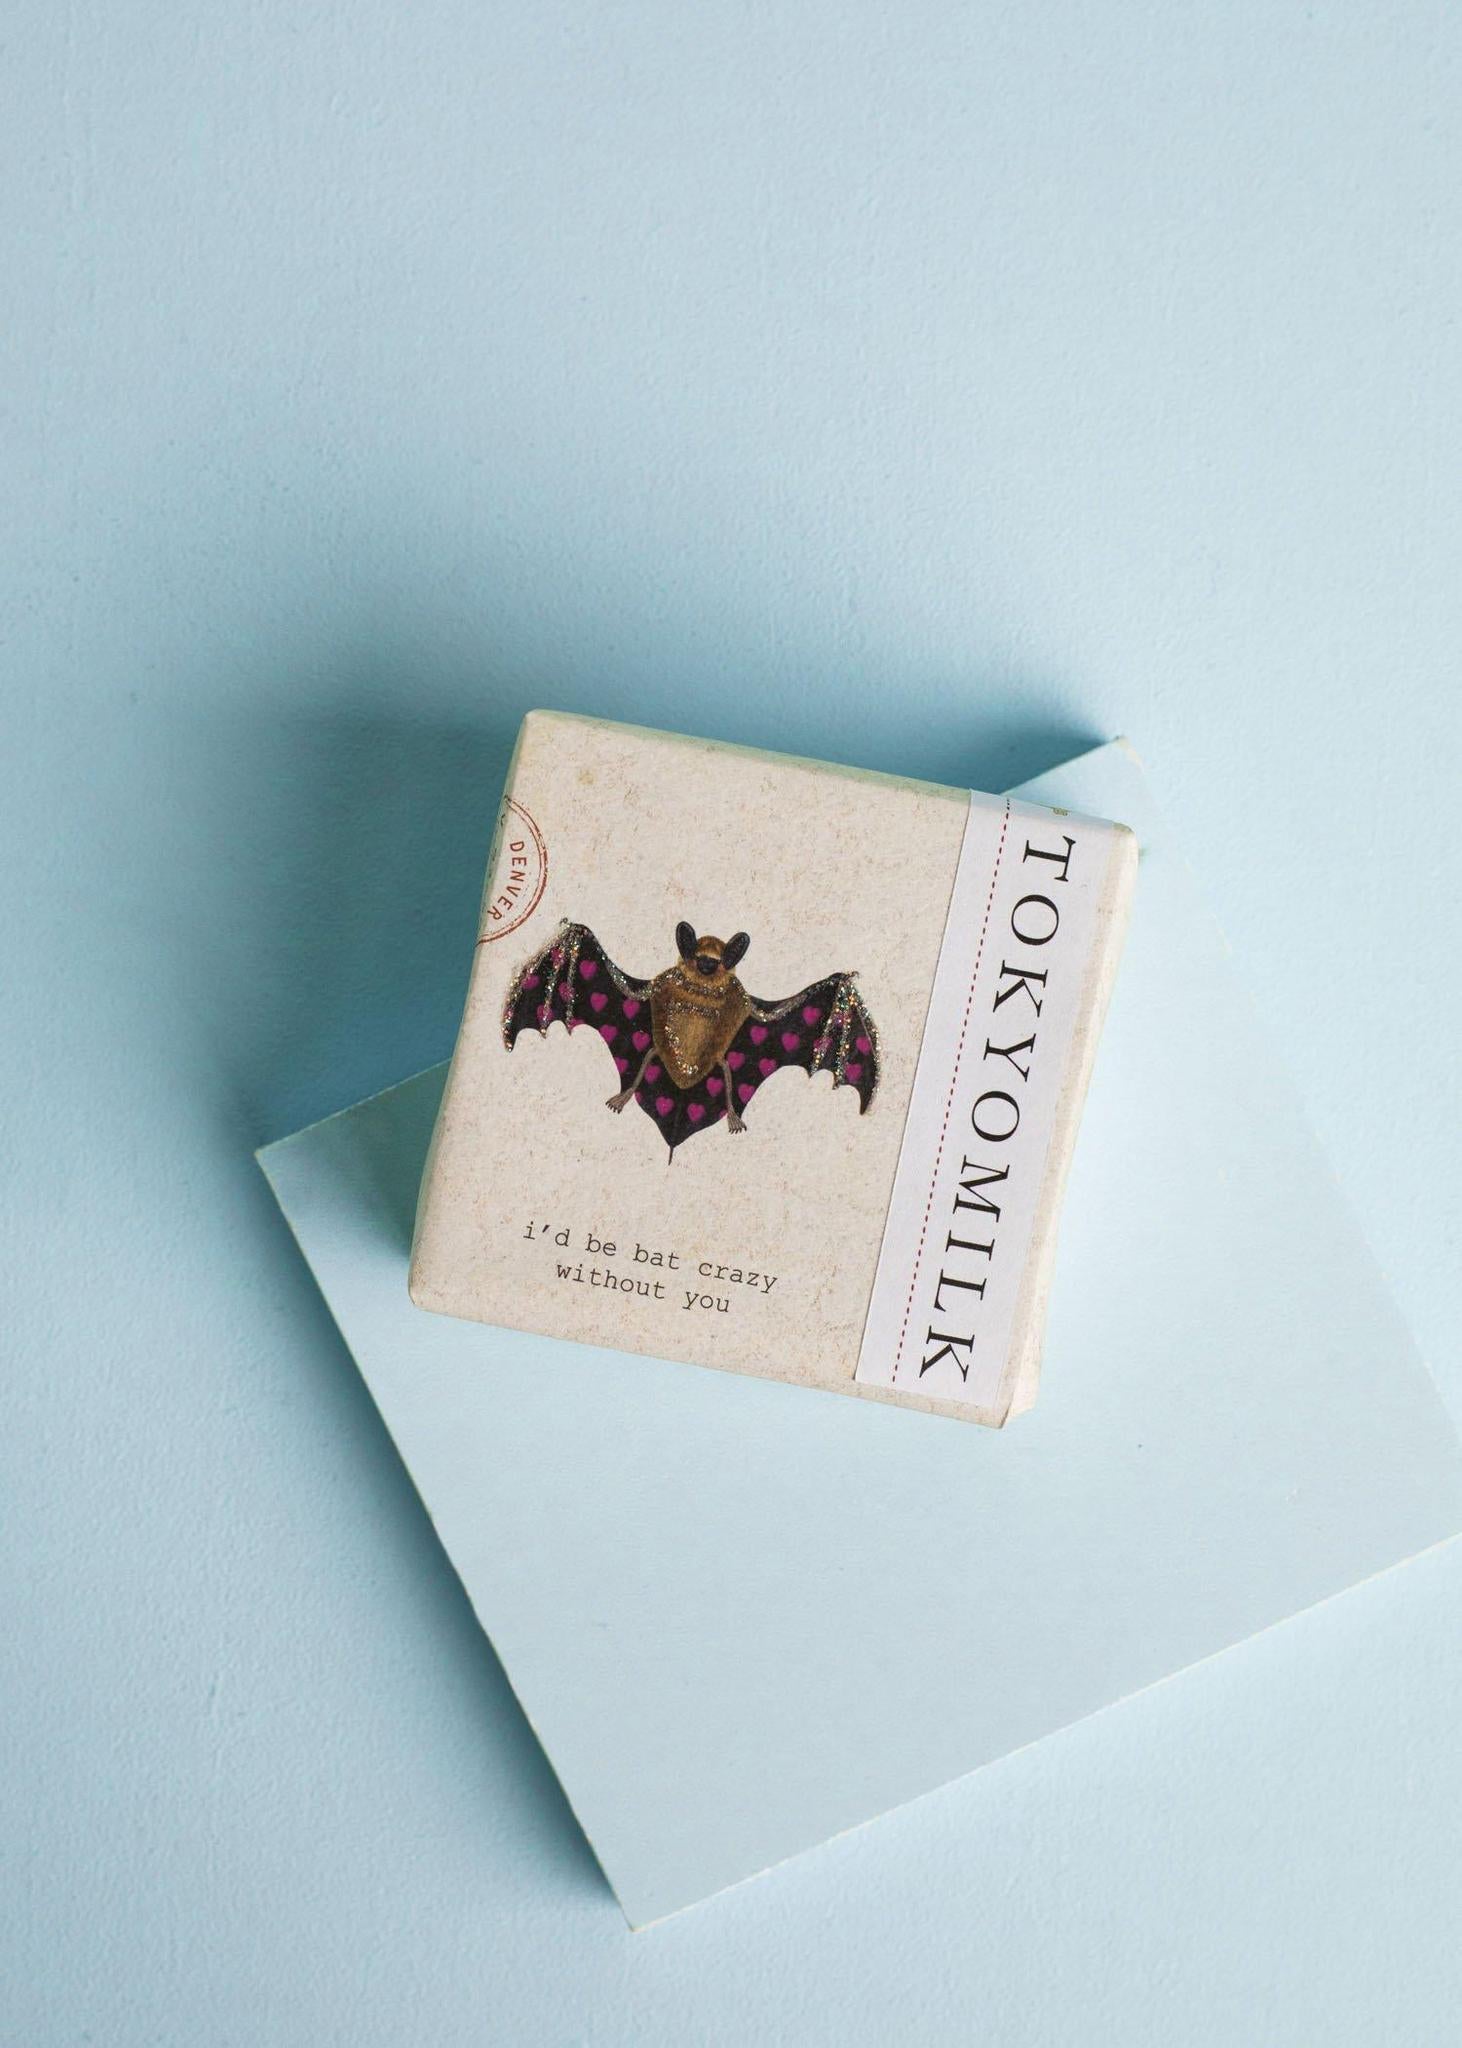 Finest Perfumed Soap, Bat Crazy Without You